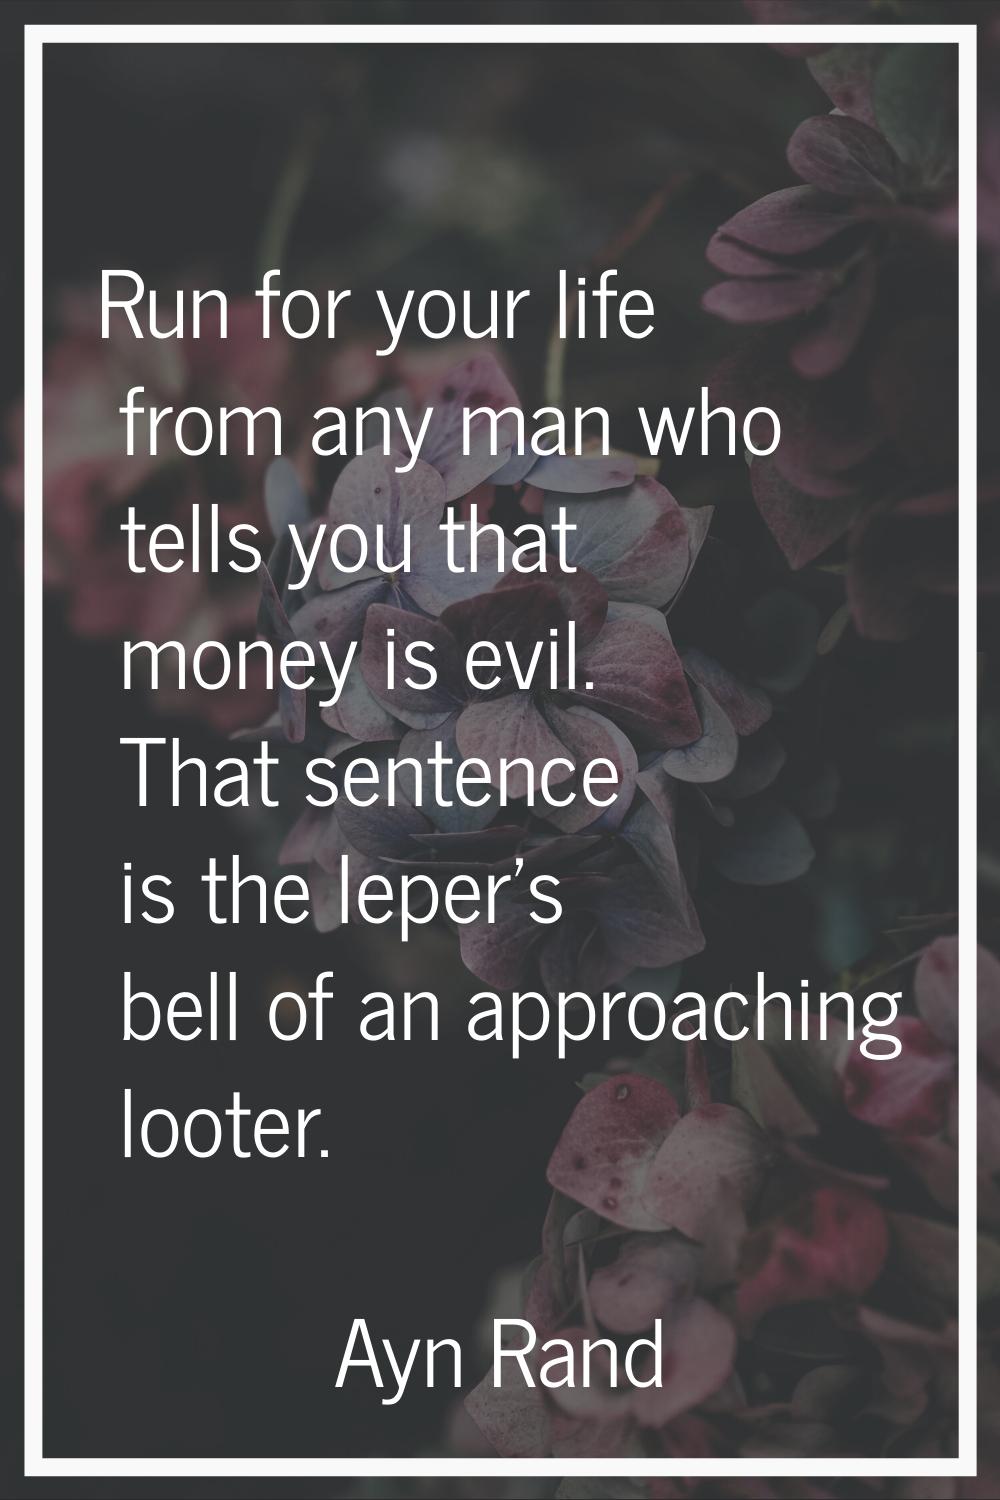 Run for your life from any man who tells you that money is evil. That sentence is the leper's bell 